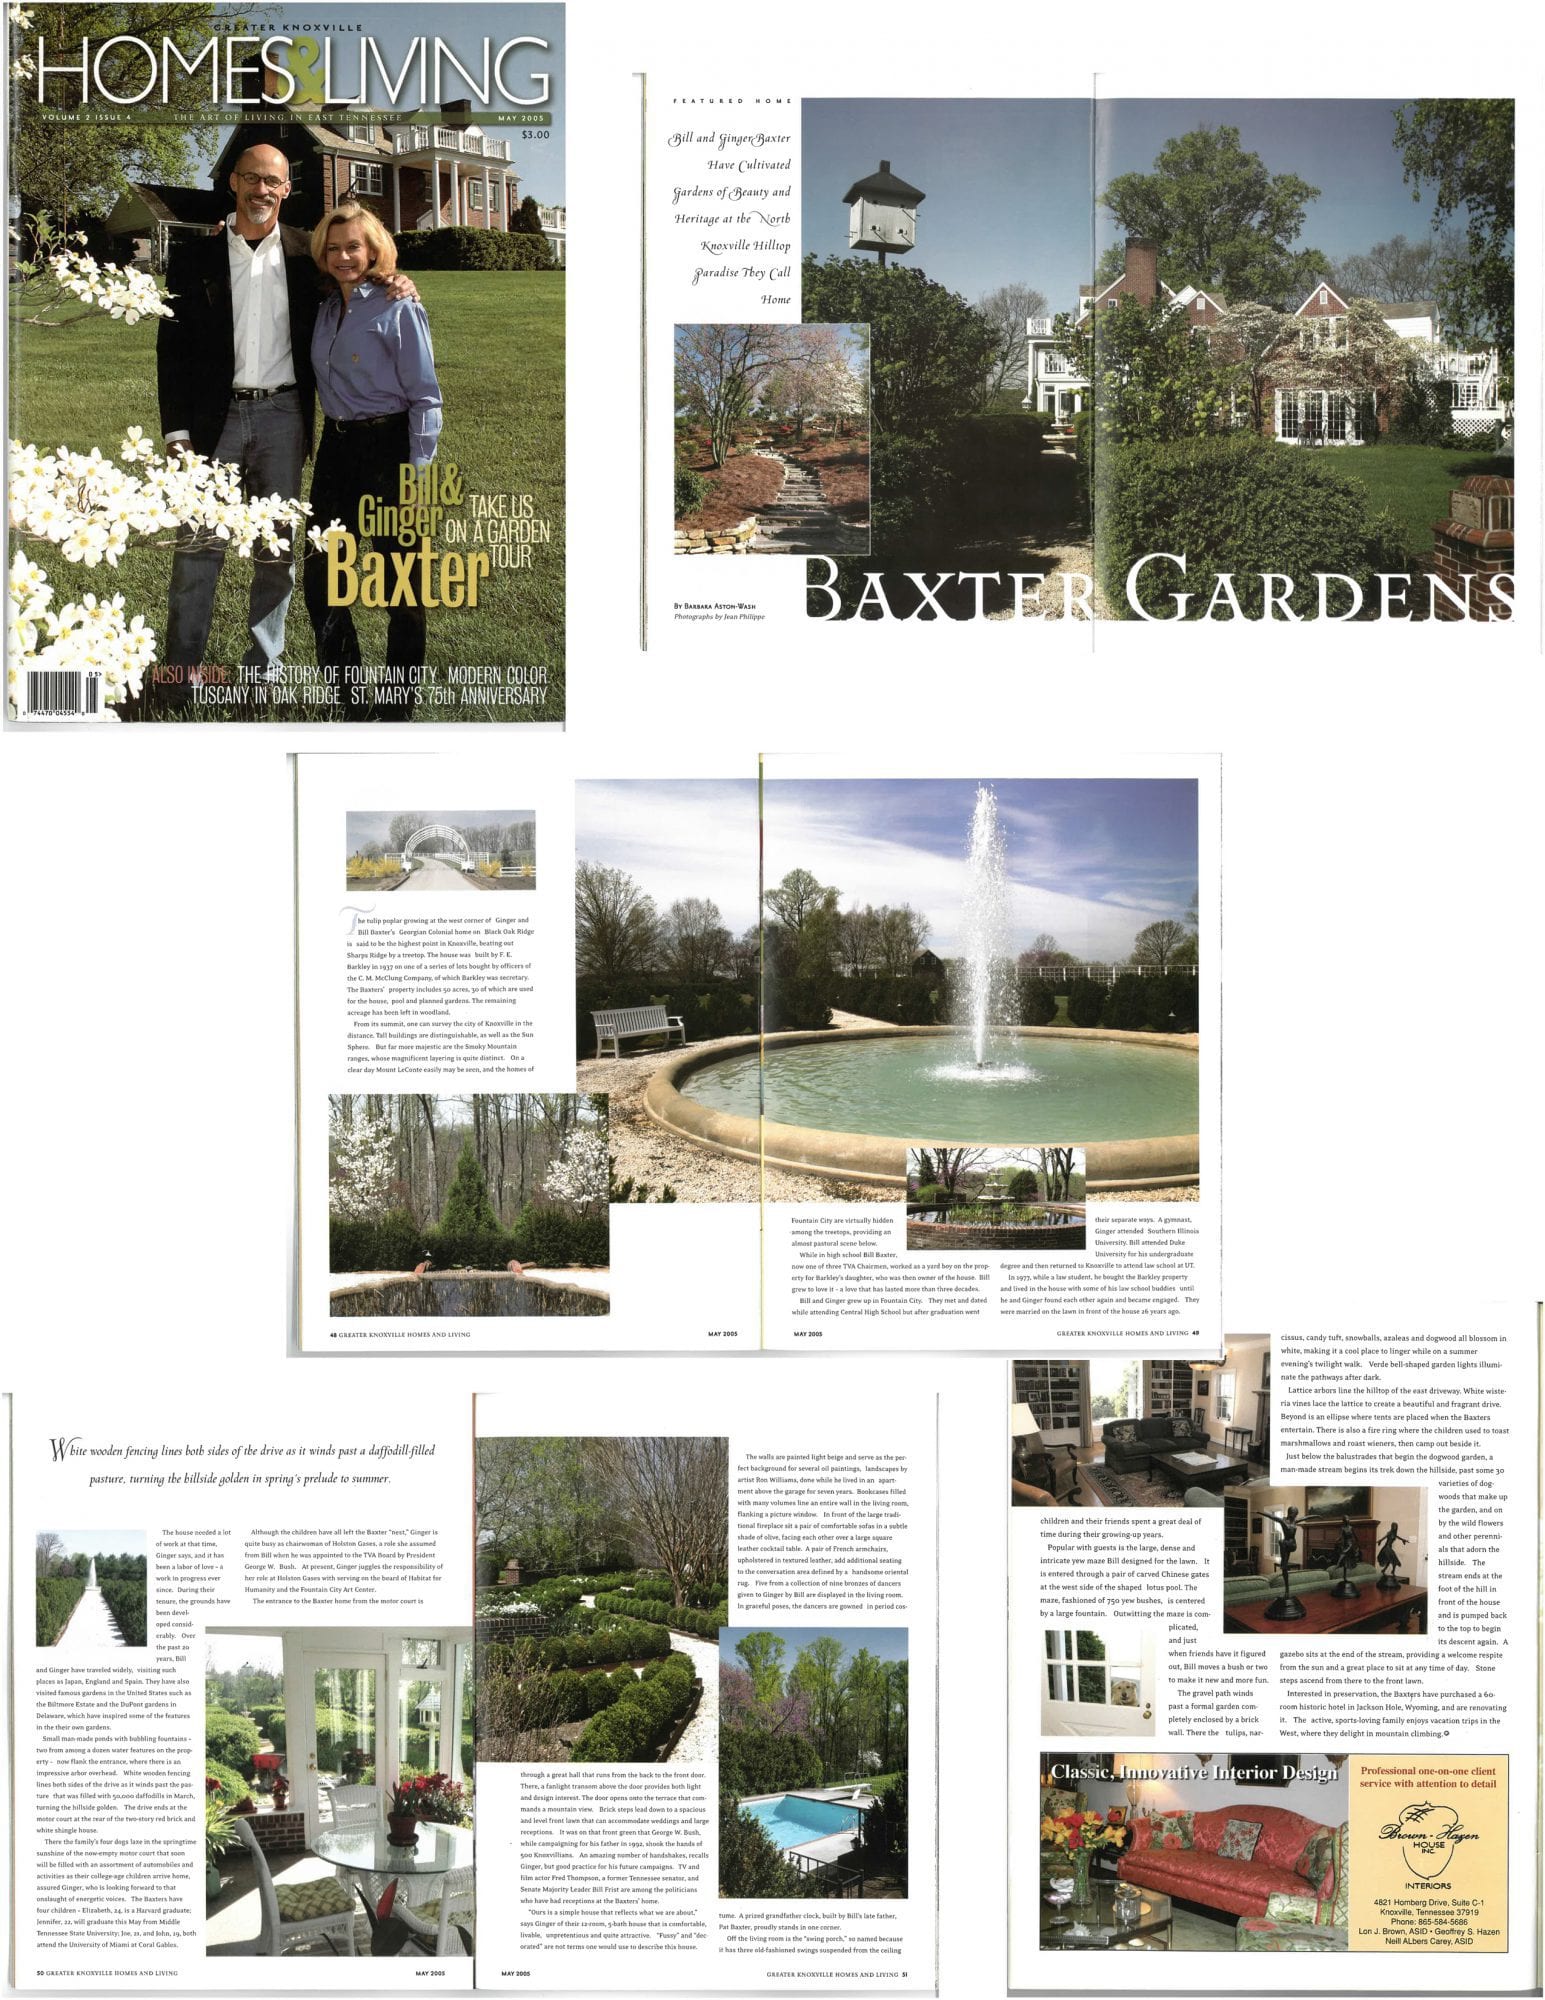 Baxter Gardens Homes and Living magazine feature